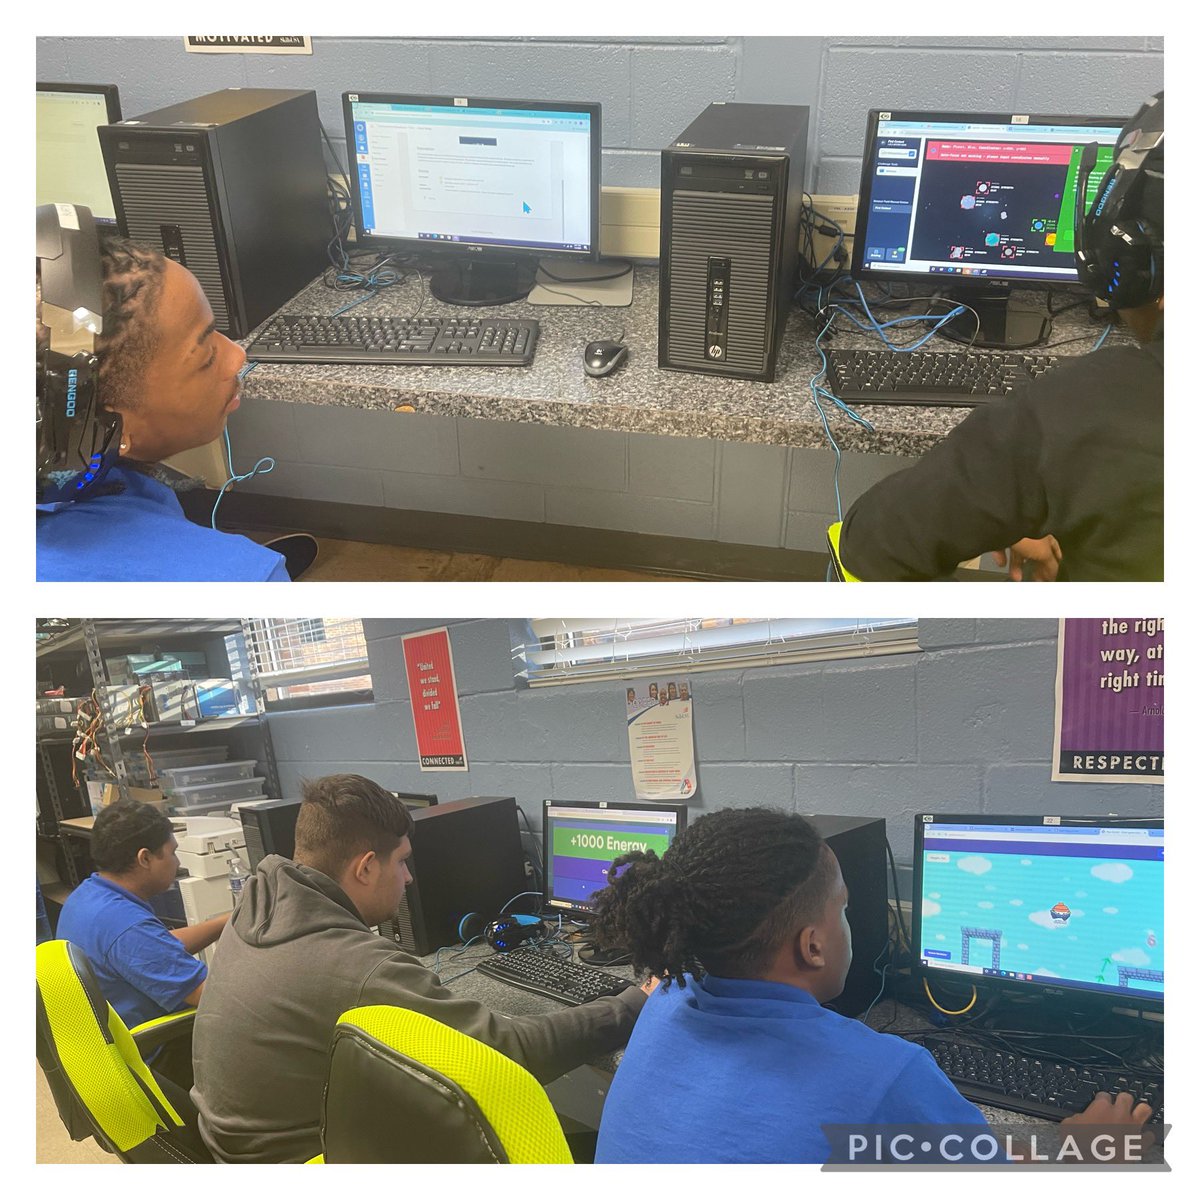 Cybersecurity students diving into the day with determination! 💻🔐 Certification prep in full swing – mastering the art of safeguarding the digital frontier. #CertificationPrep #GettinItDone #NHRECCTE  #LeadBoldly #WeAreNewHorizons 
@NHREC_VA